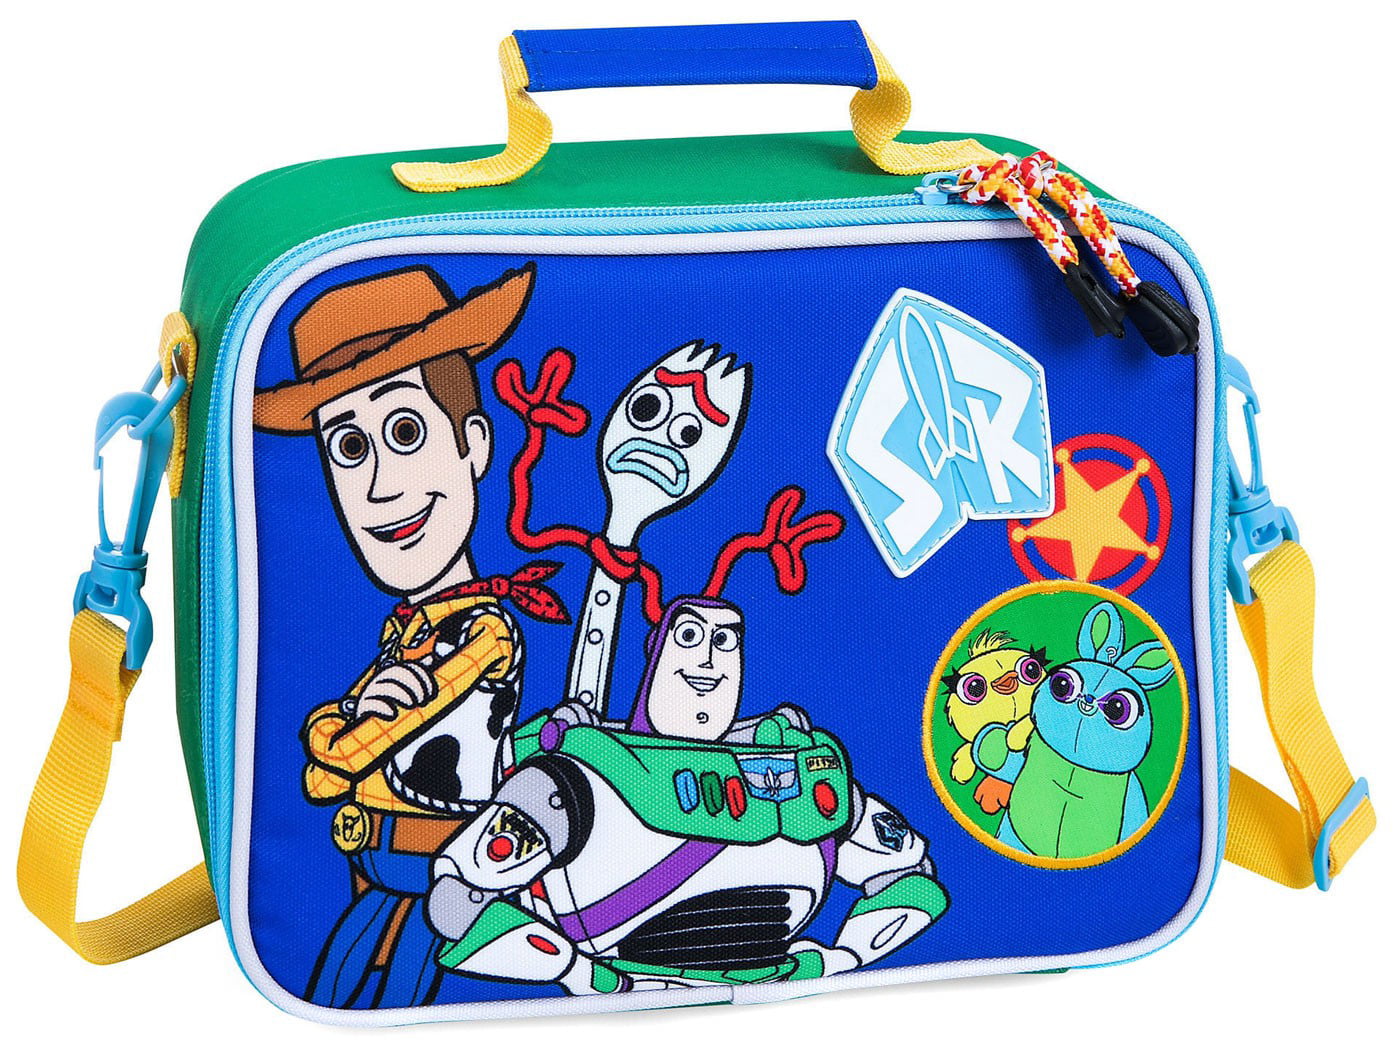 TOY STORY 4 BUZZ & WOODY Boys Lead-Free Insulated 3D Lunch Tote Box w/ Strap $20 